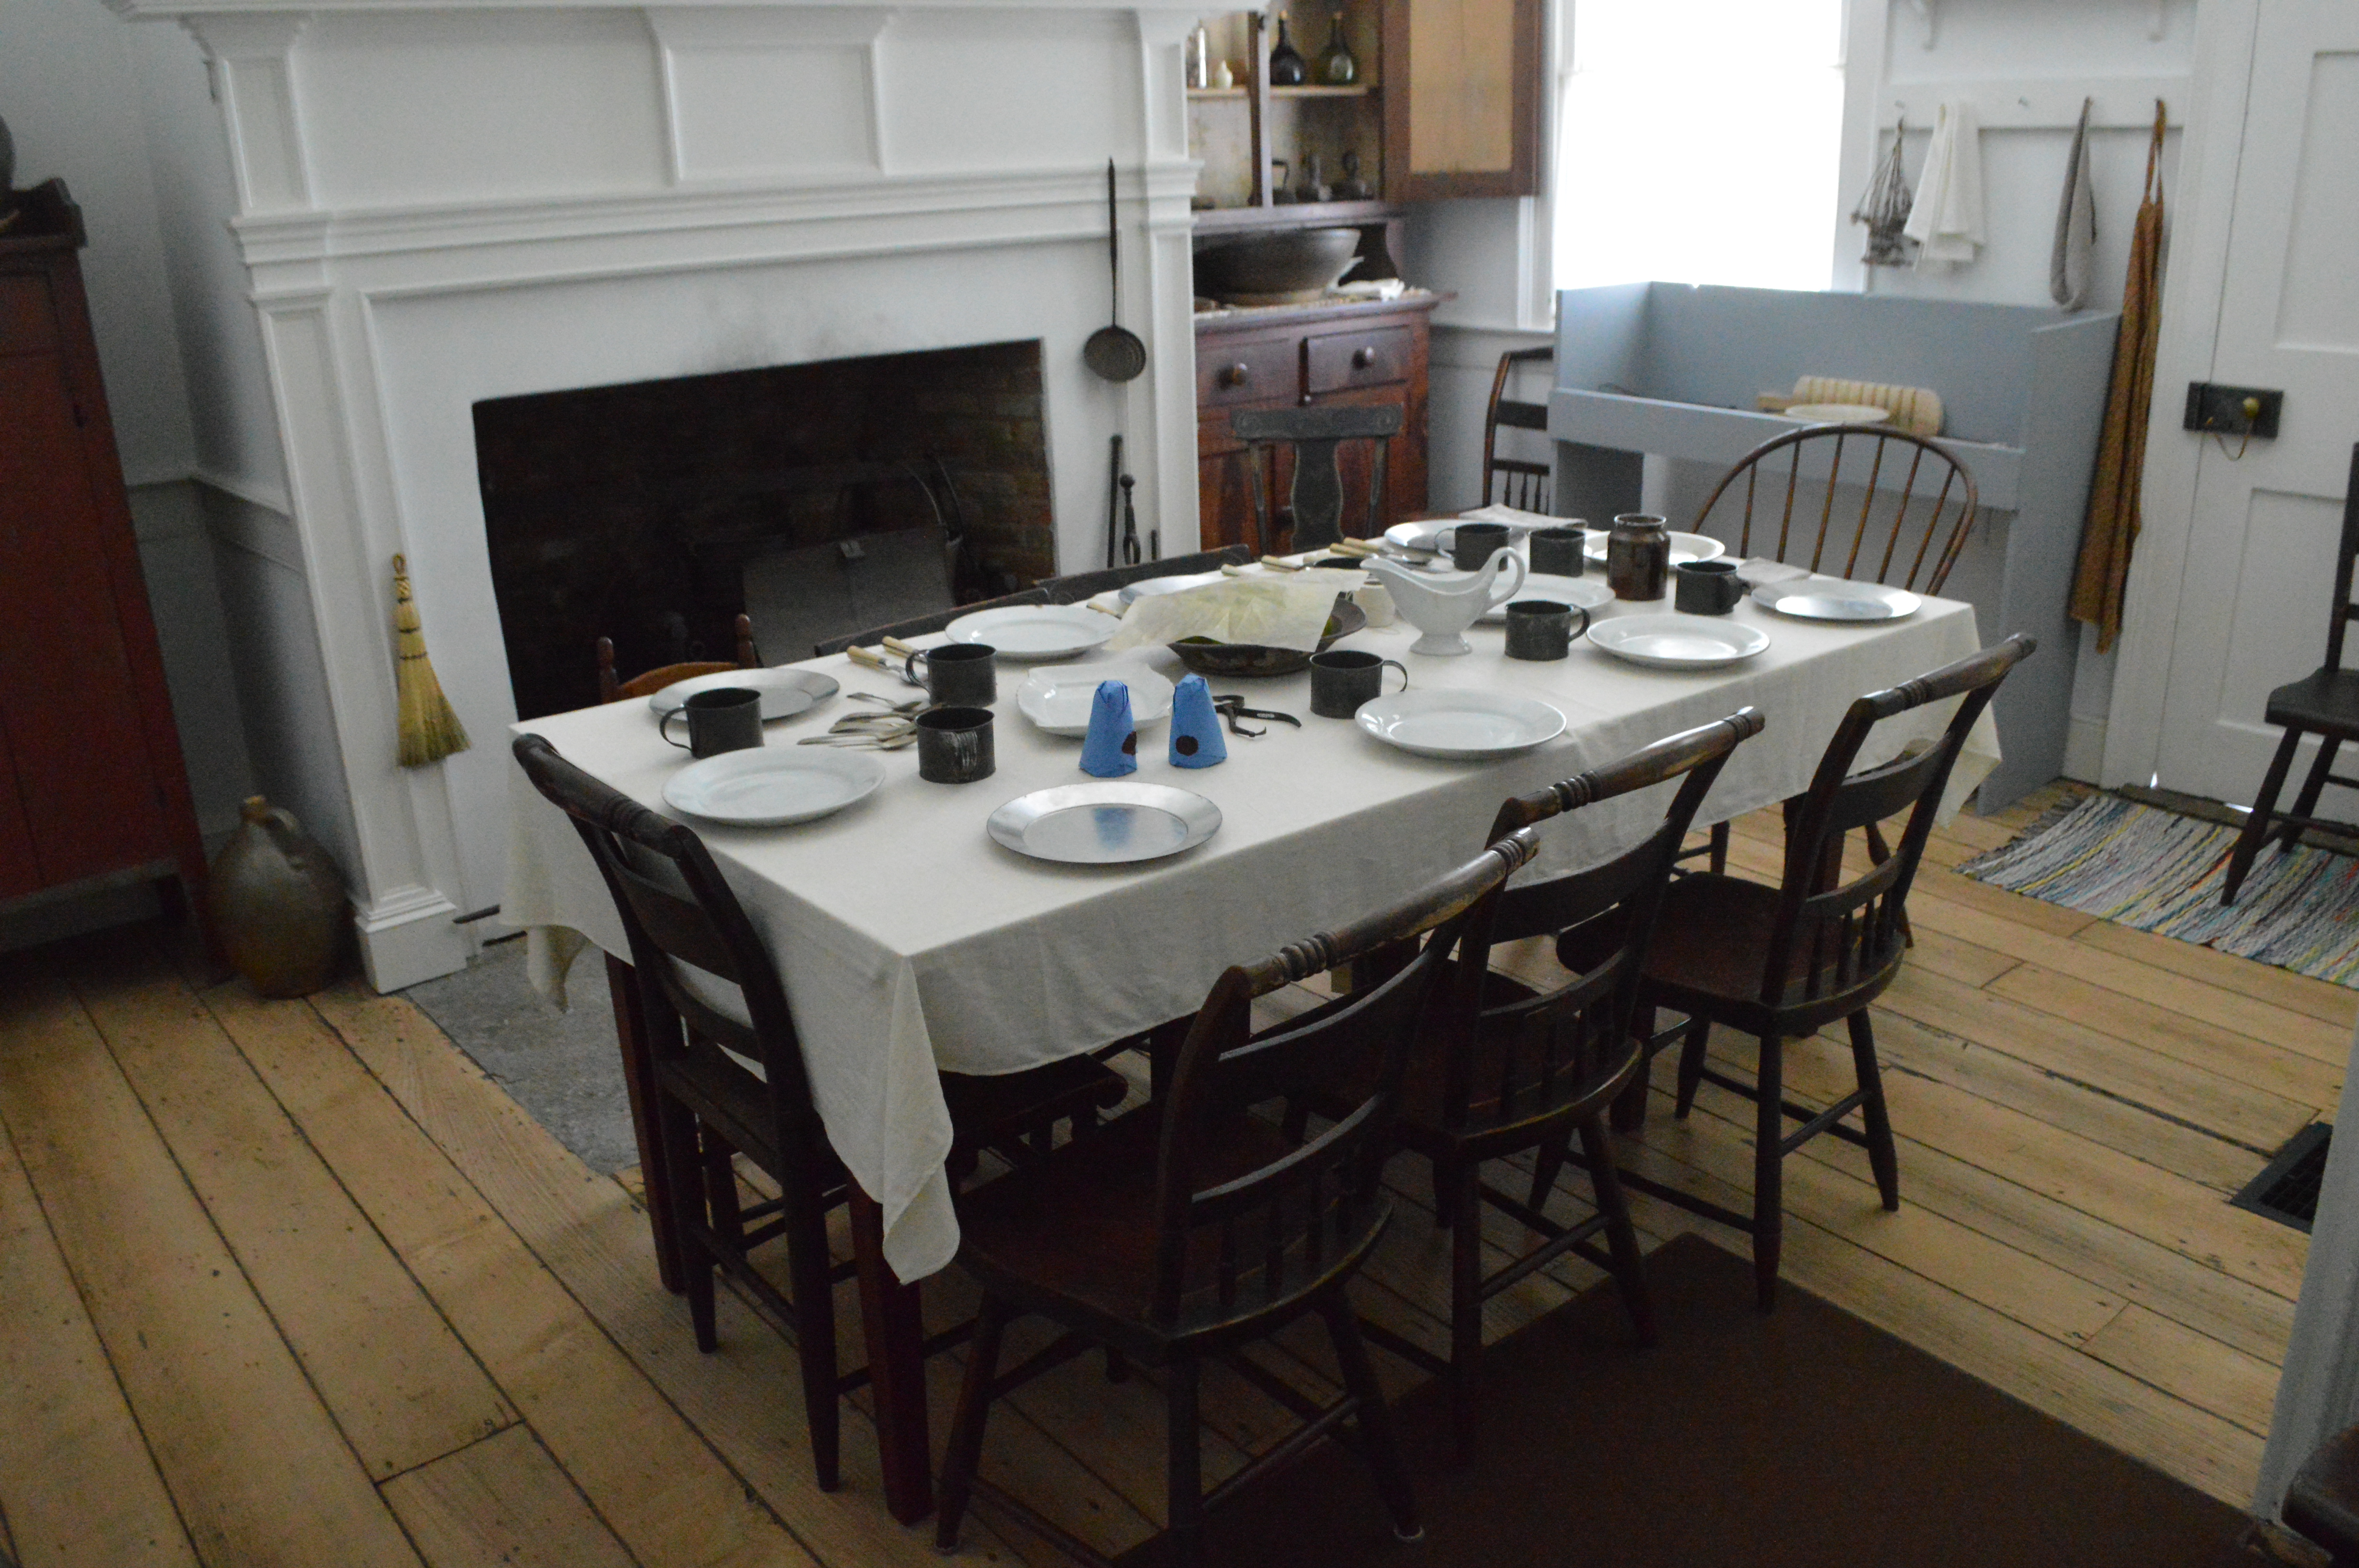 A room within the John Rankin home, staged to look as the family's kitchen once may have